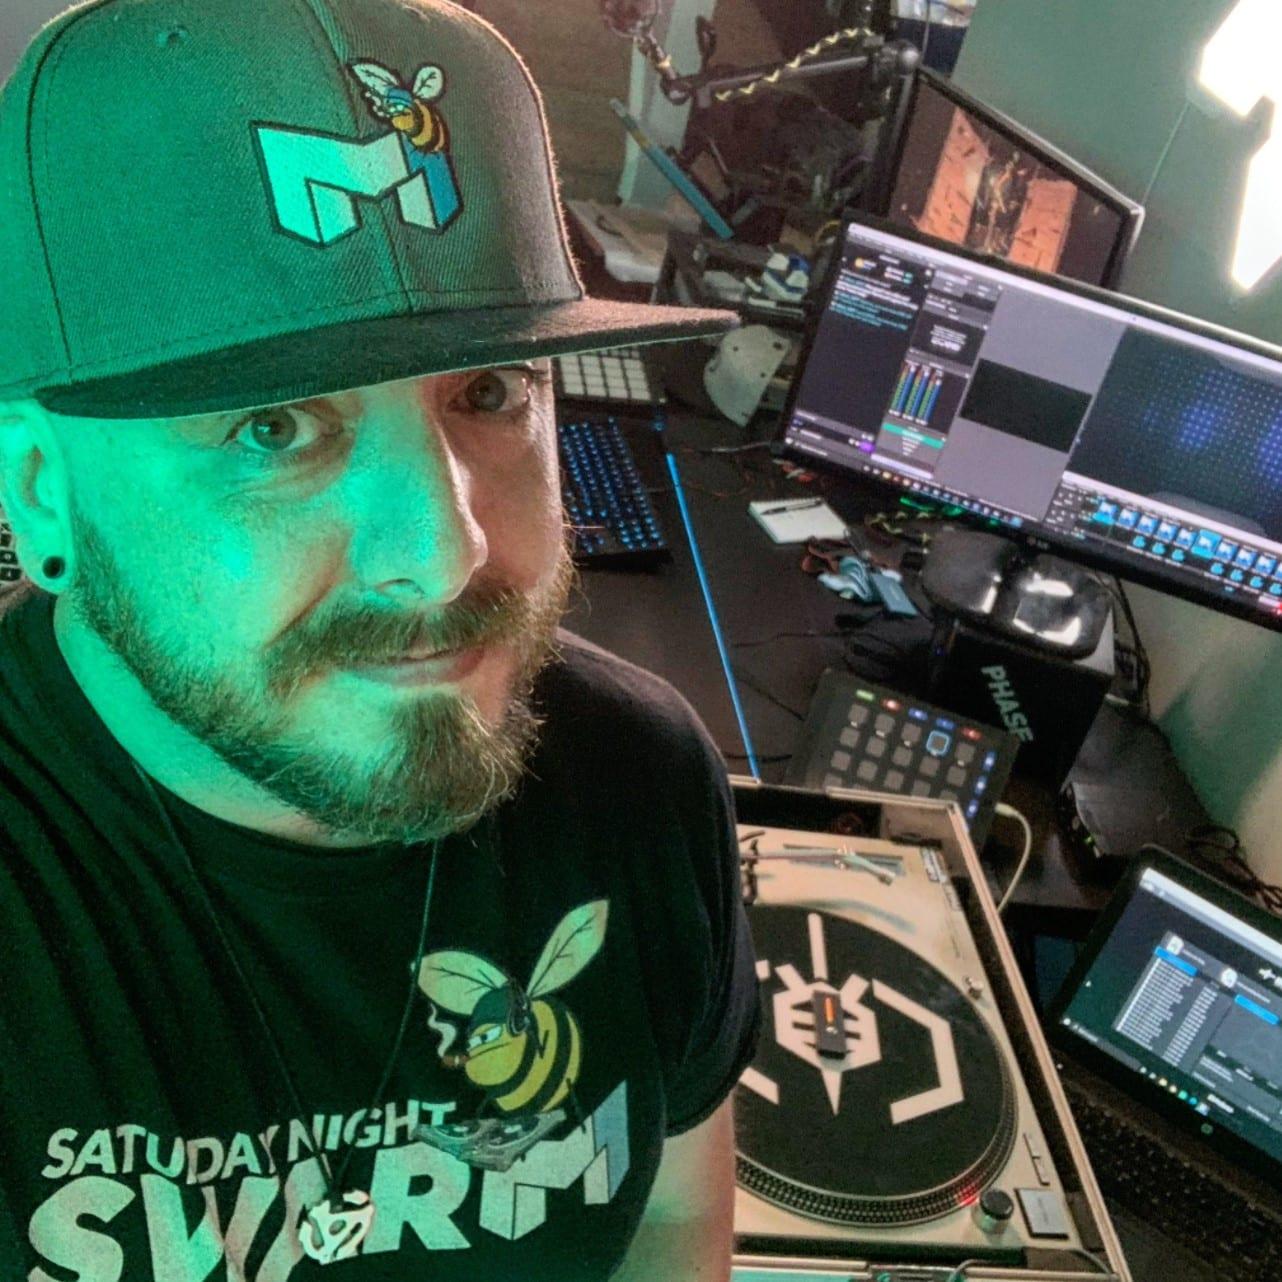 DJ mind1 posing with his twitch set-up